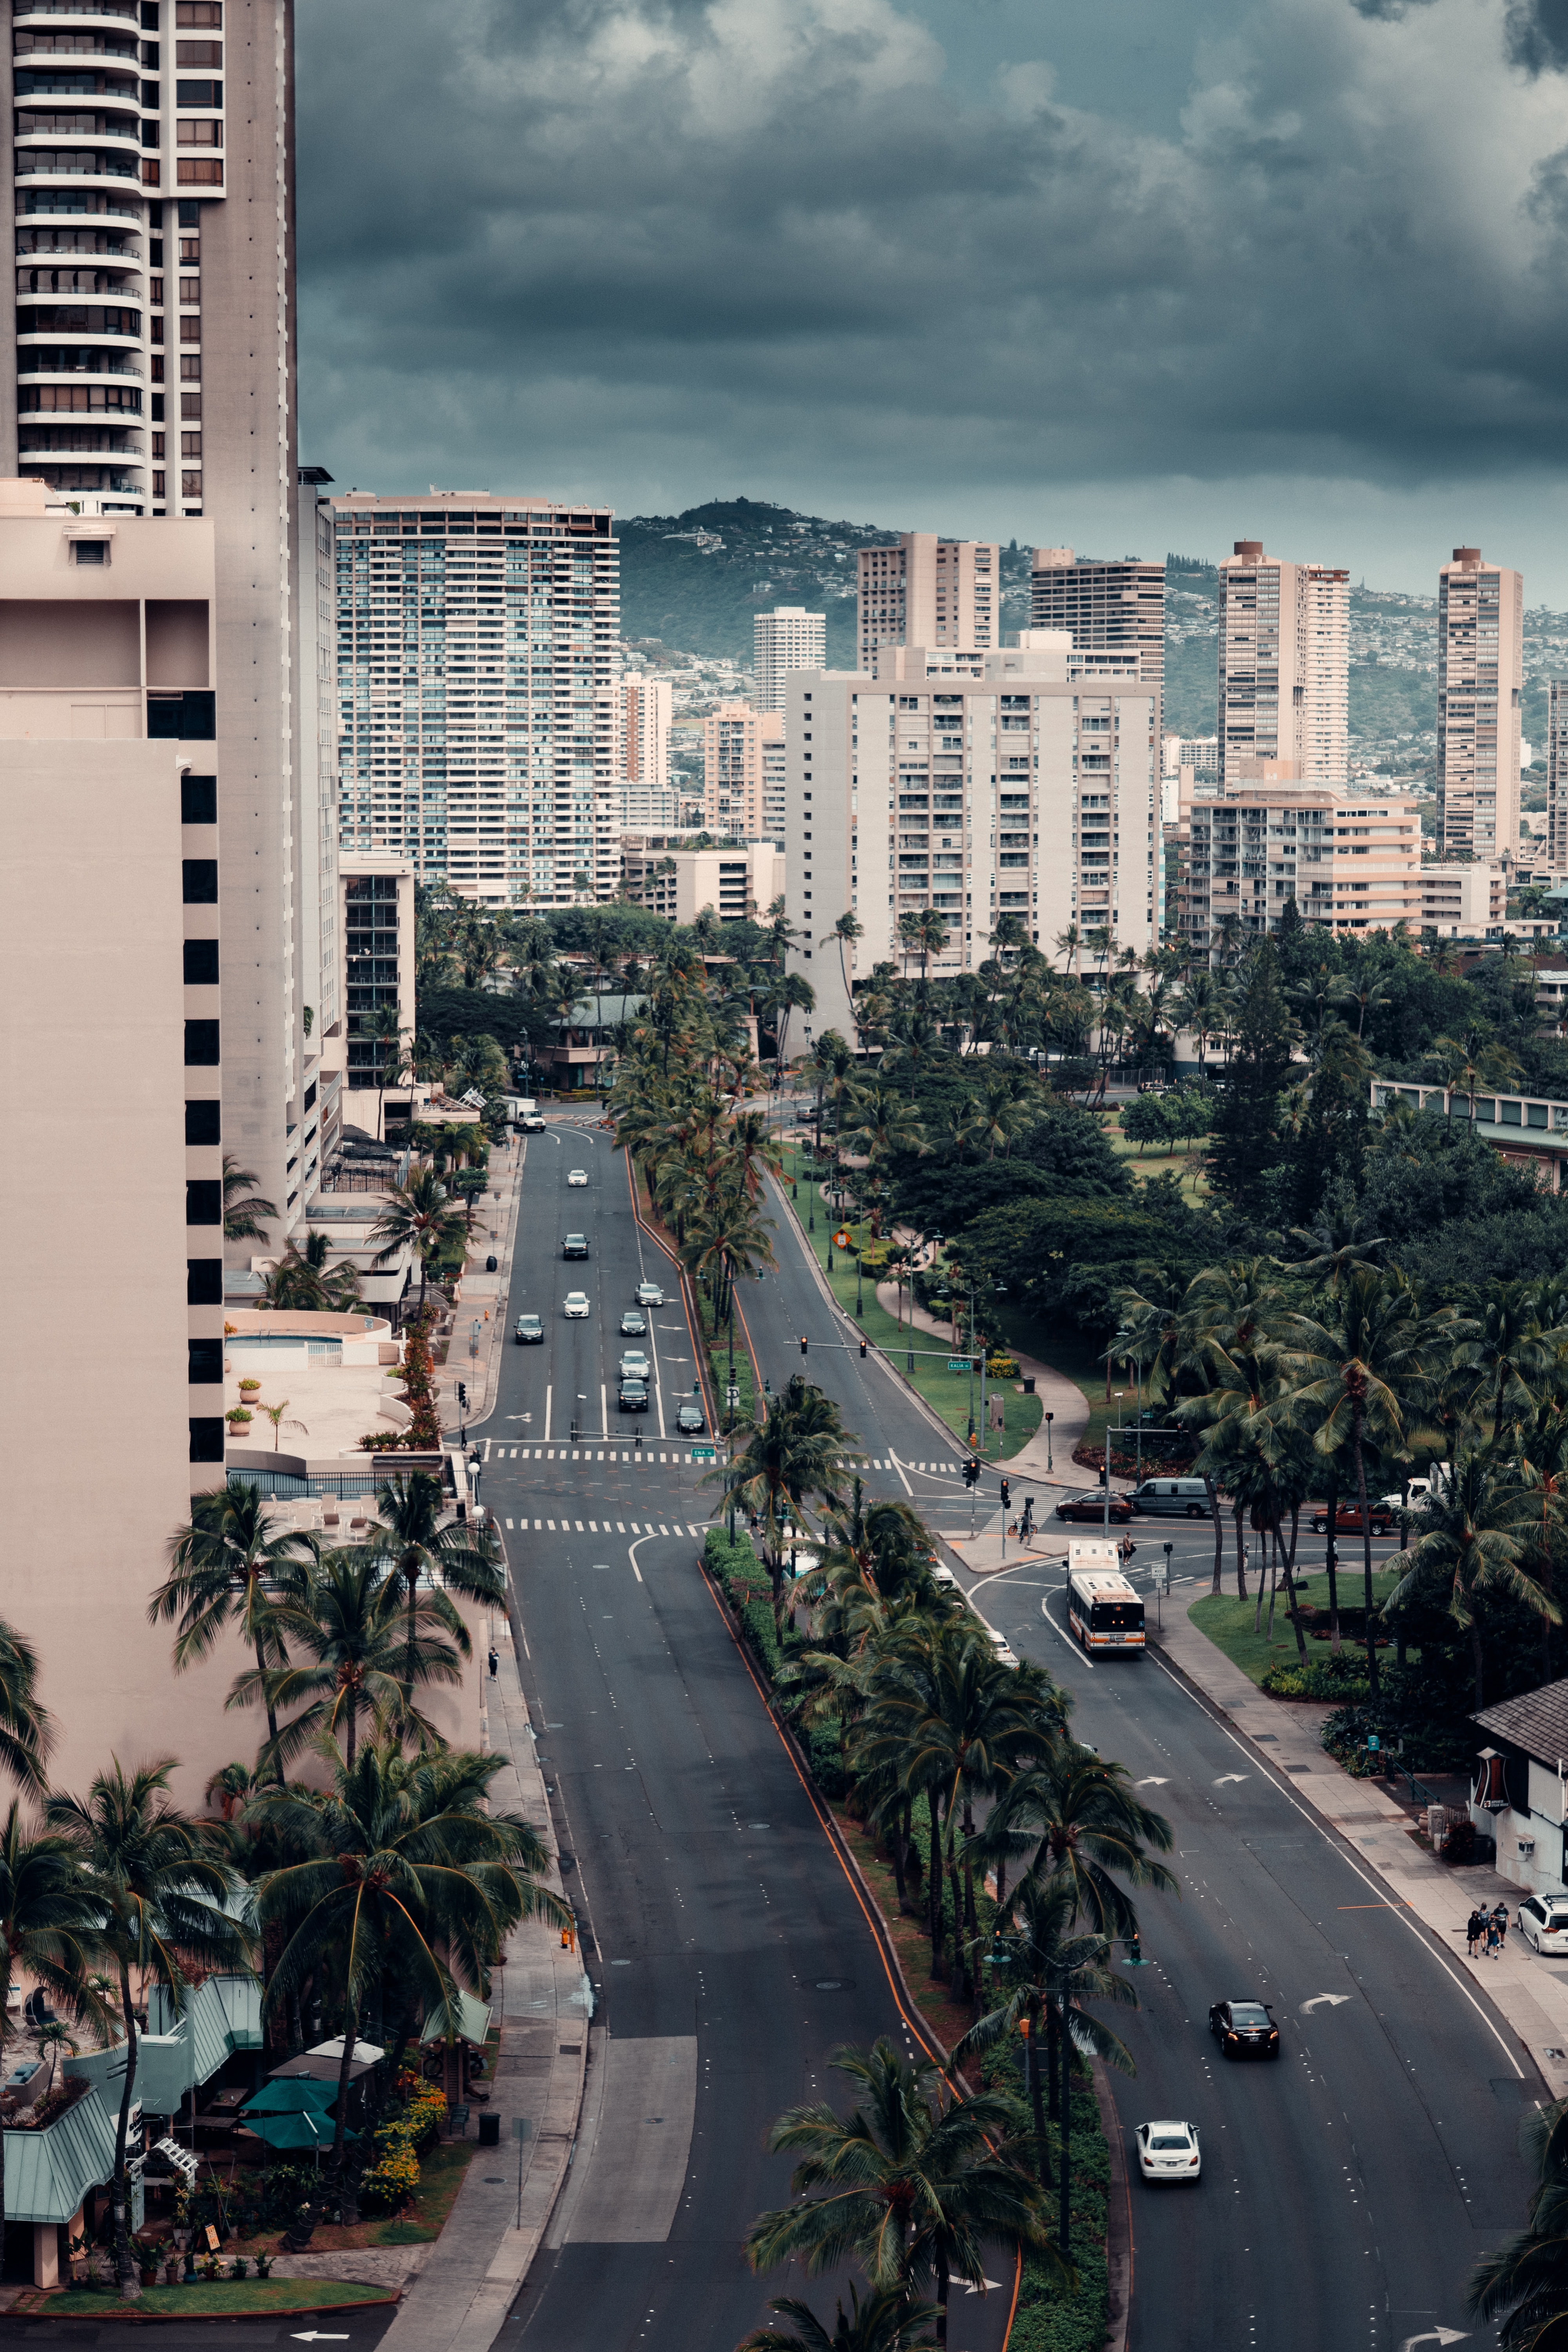 cities, palms, city, building, view from above, road Image for desktop